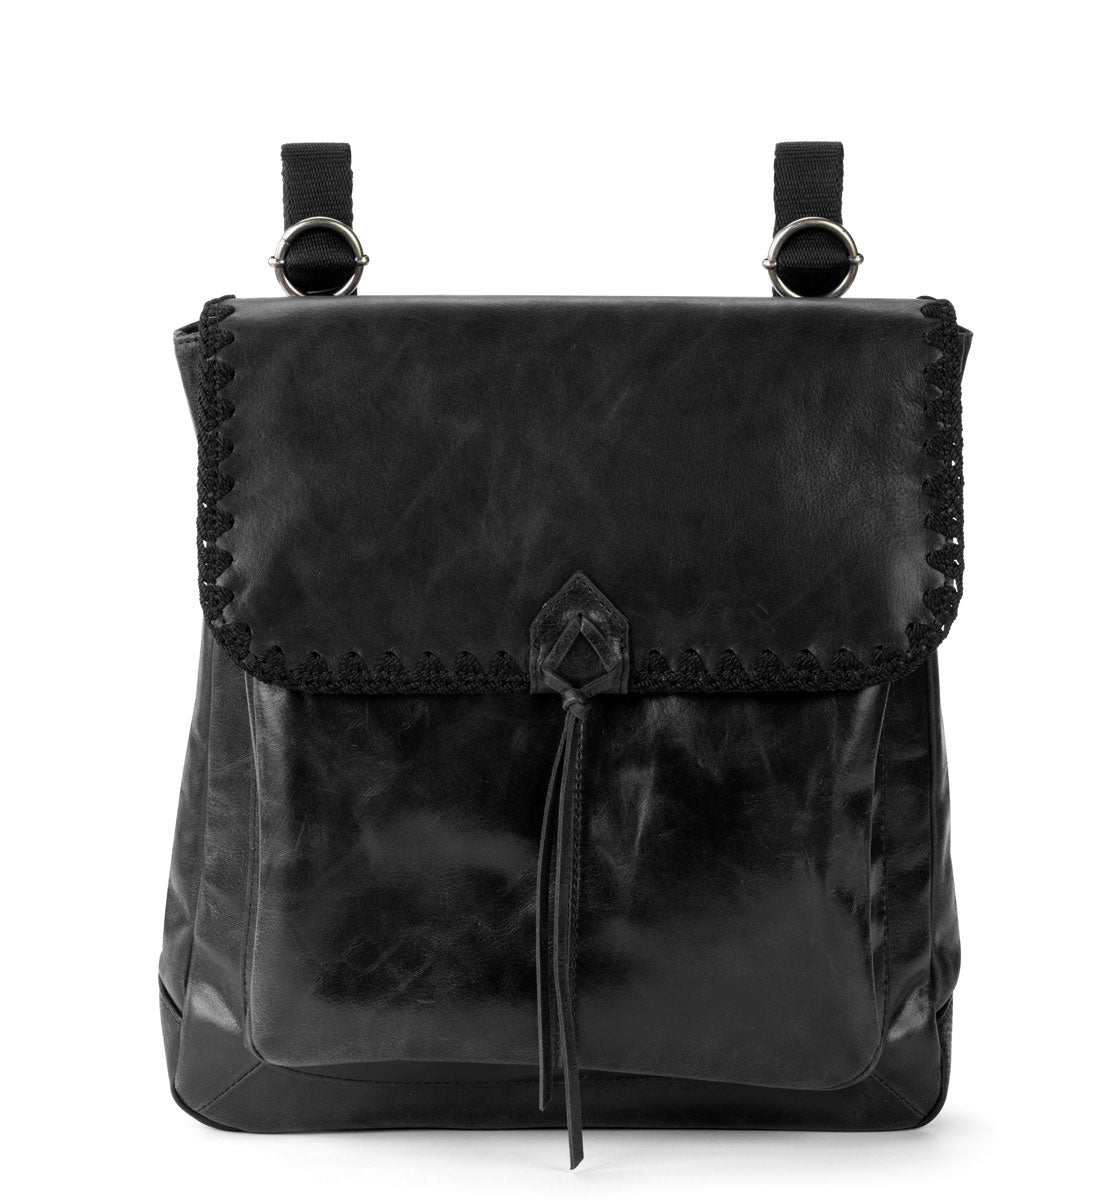 MULTI SAC BLACK FAUX LEATHER CONVERTIBLE BACKPACK/PURSE WITH ADJUSTABLE  STRAP